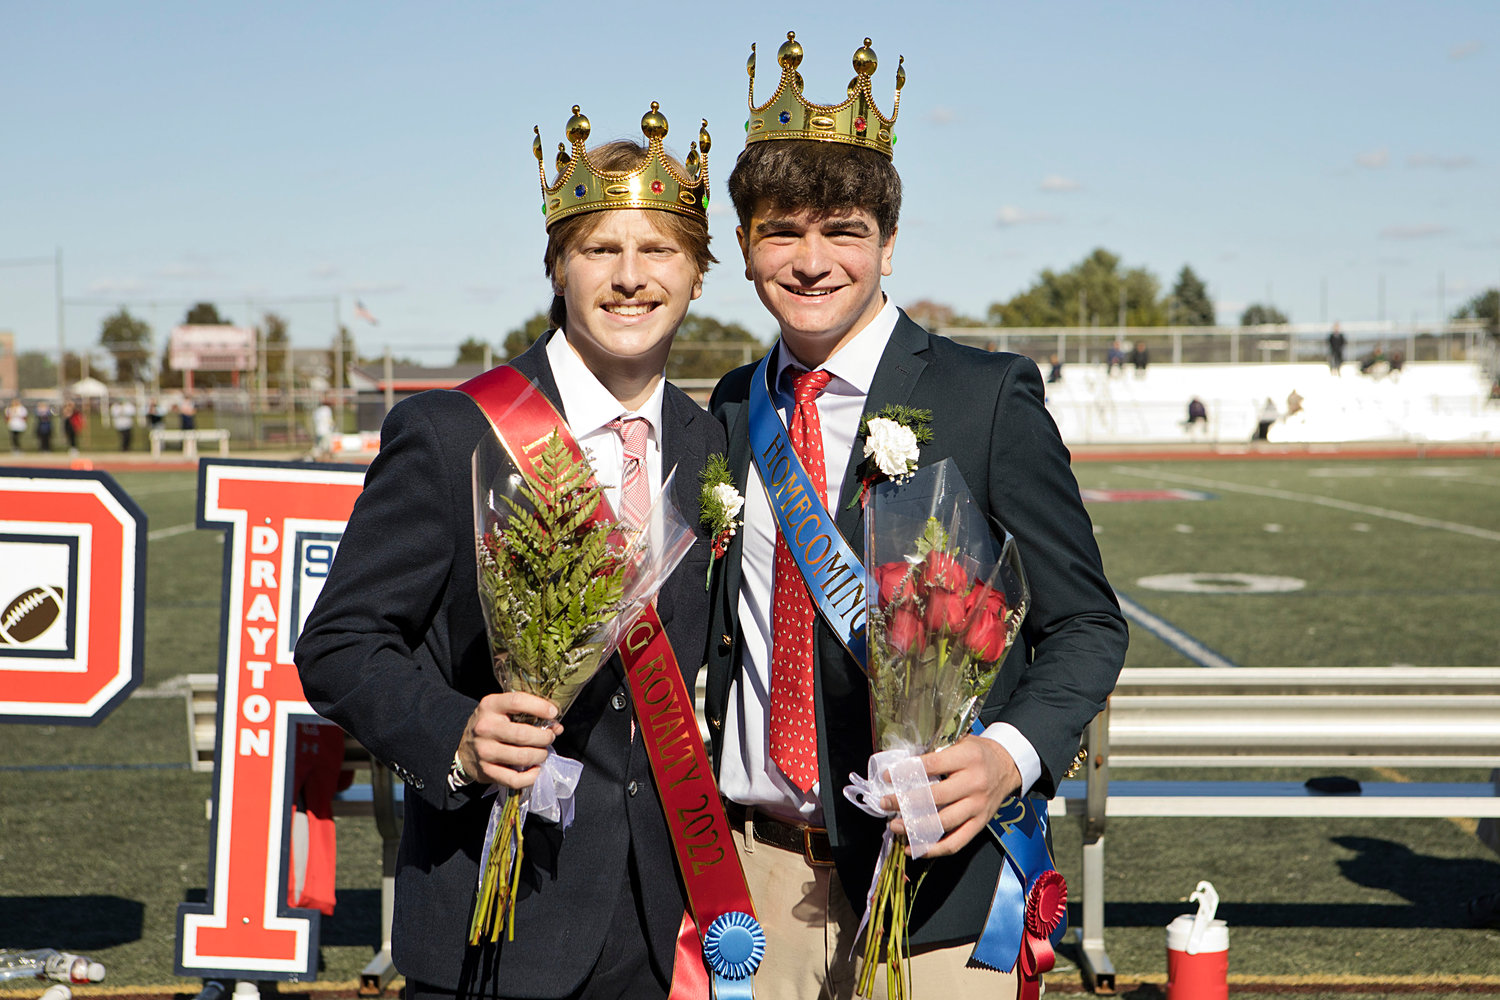 Nick Waycuilis and Luke Carlin pose for a photo after being crowned Portsmouth High’s 2022 Homecoming kings.